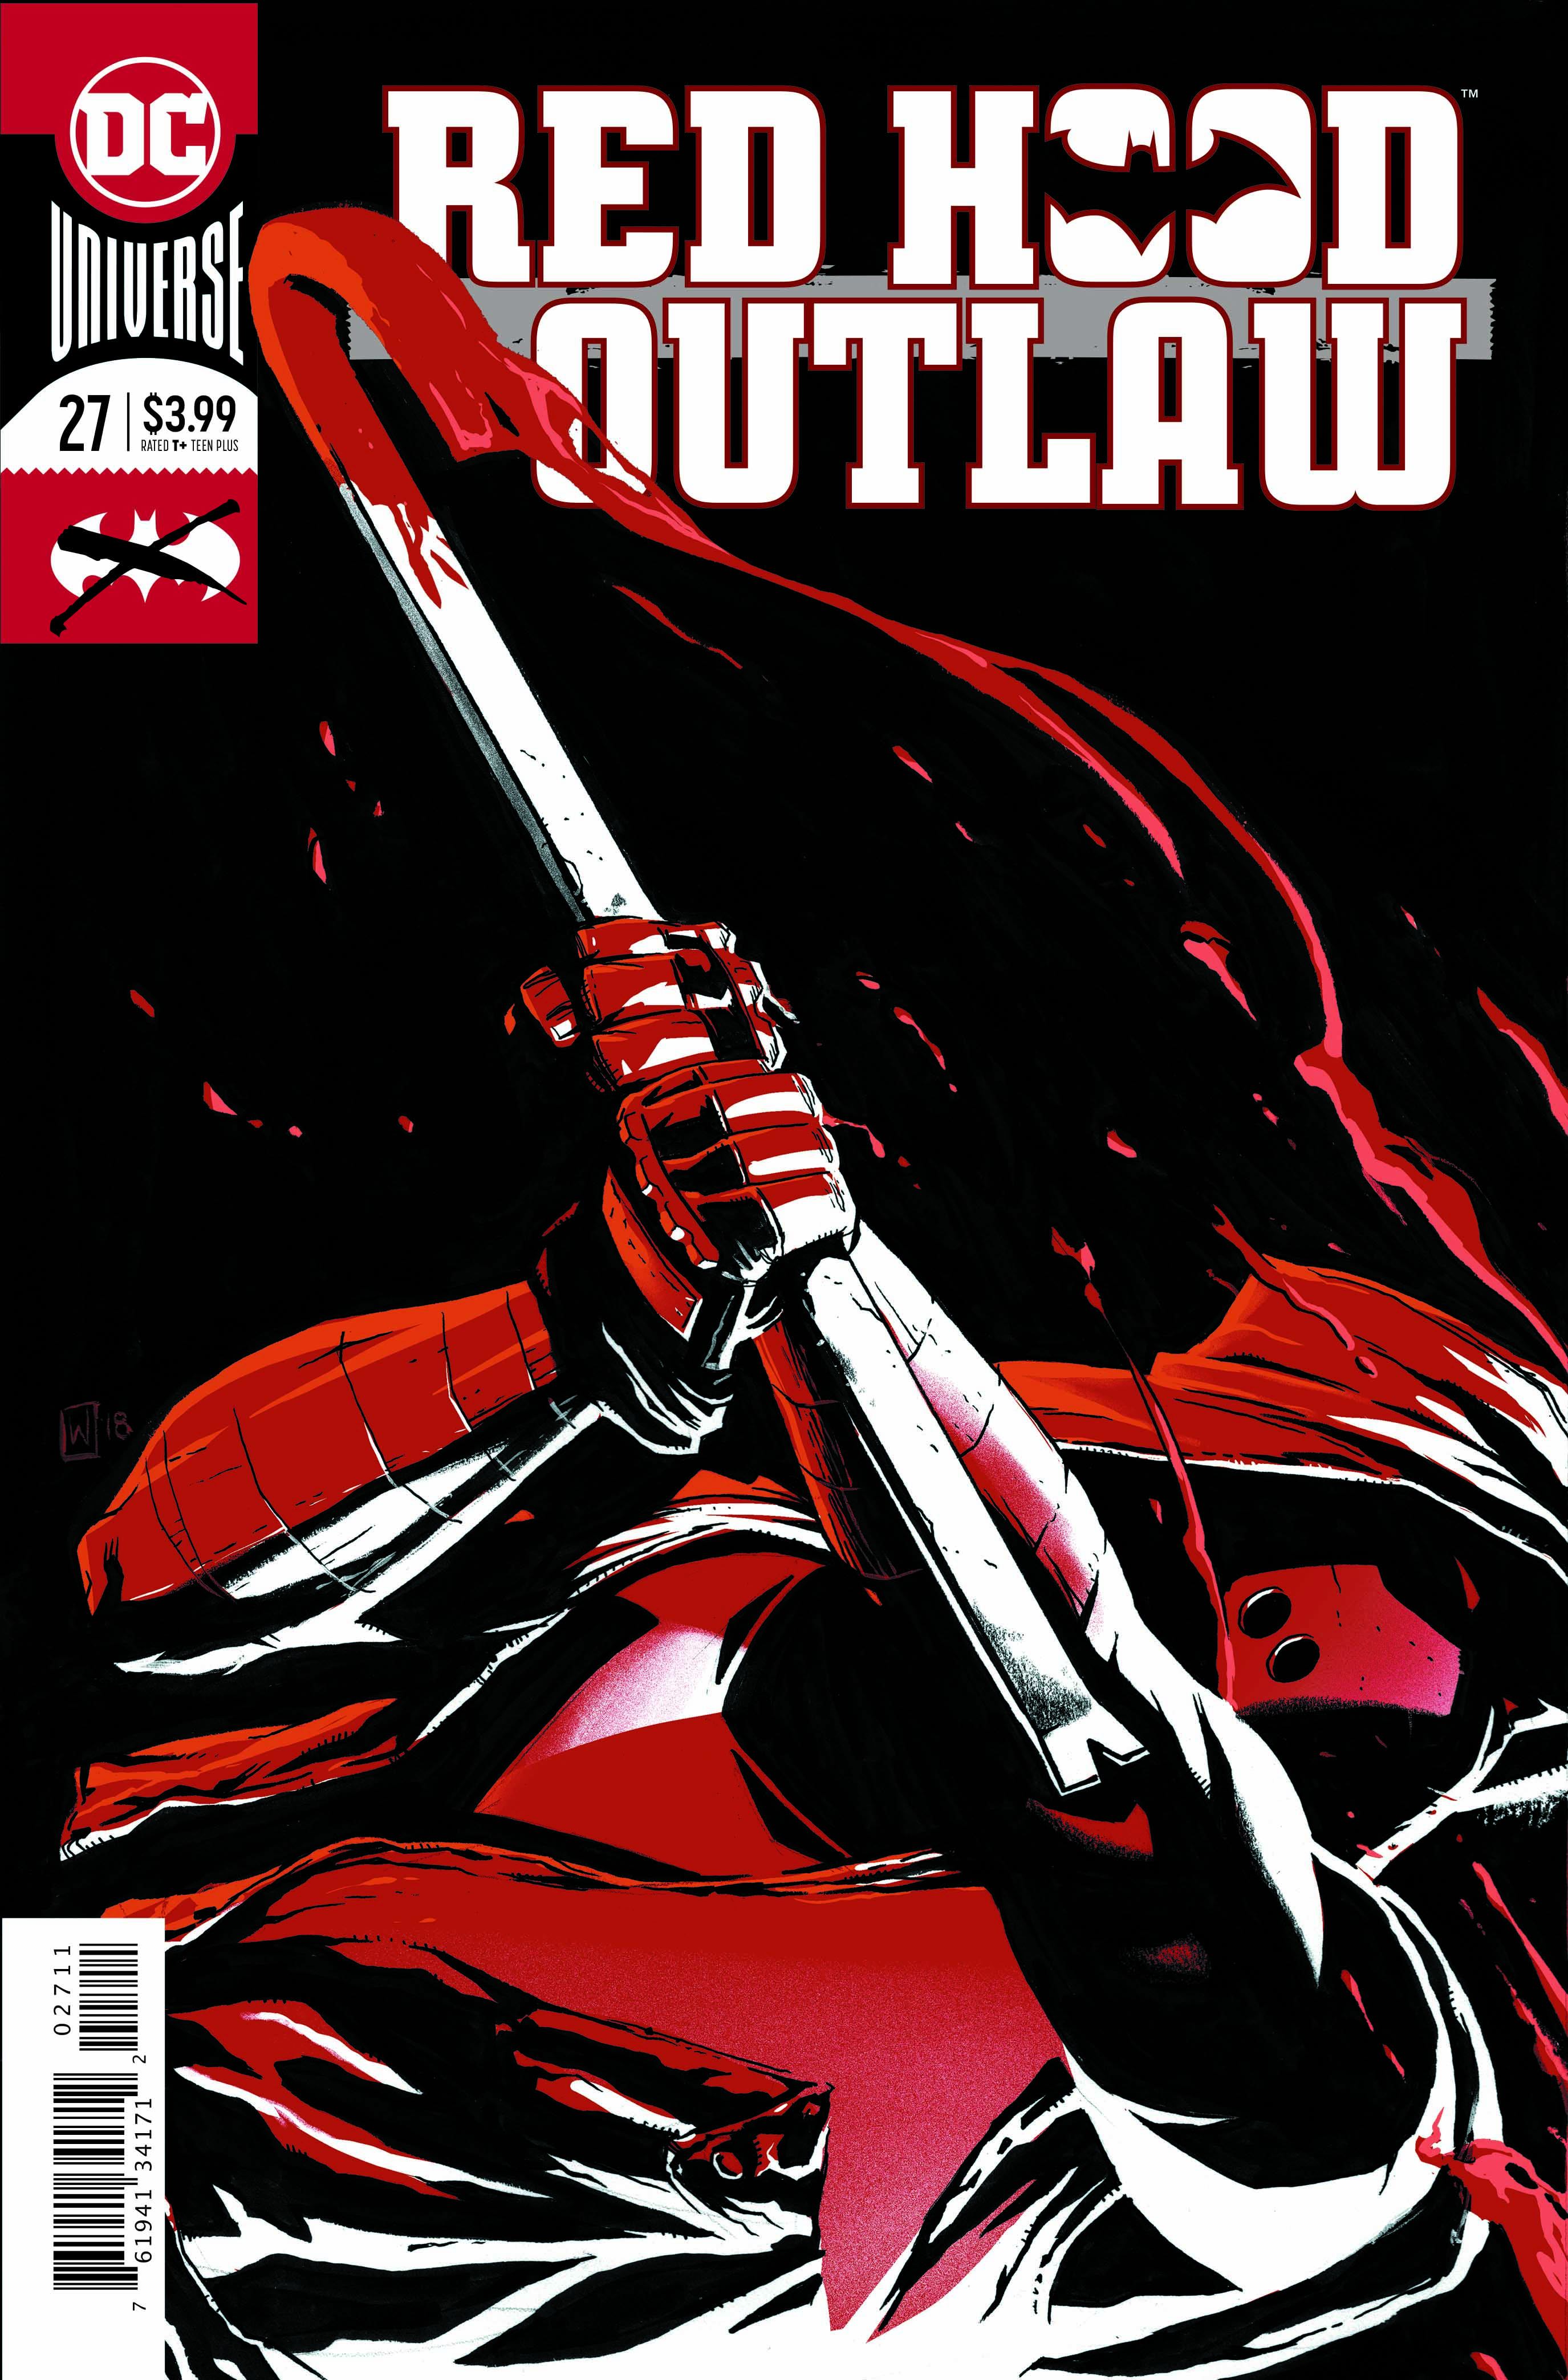 Red Hood: Outlaw #27 review: Feels like a 15-page, tacked on afterthought